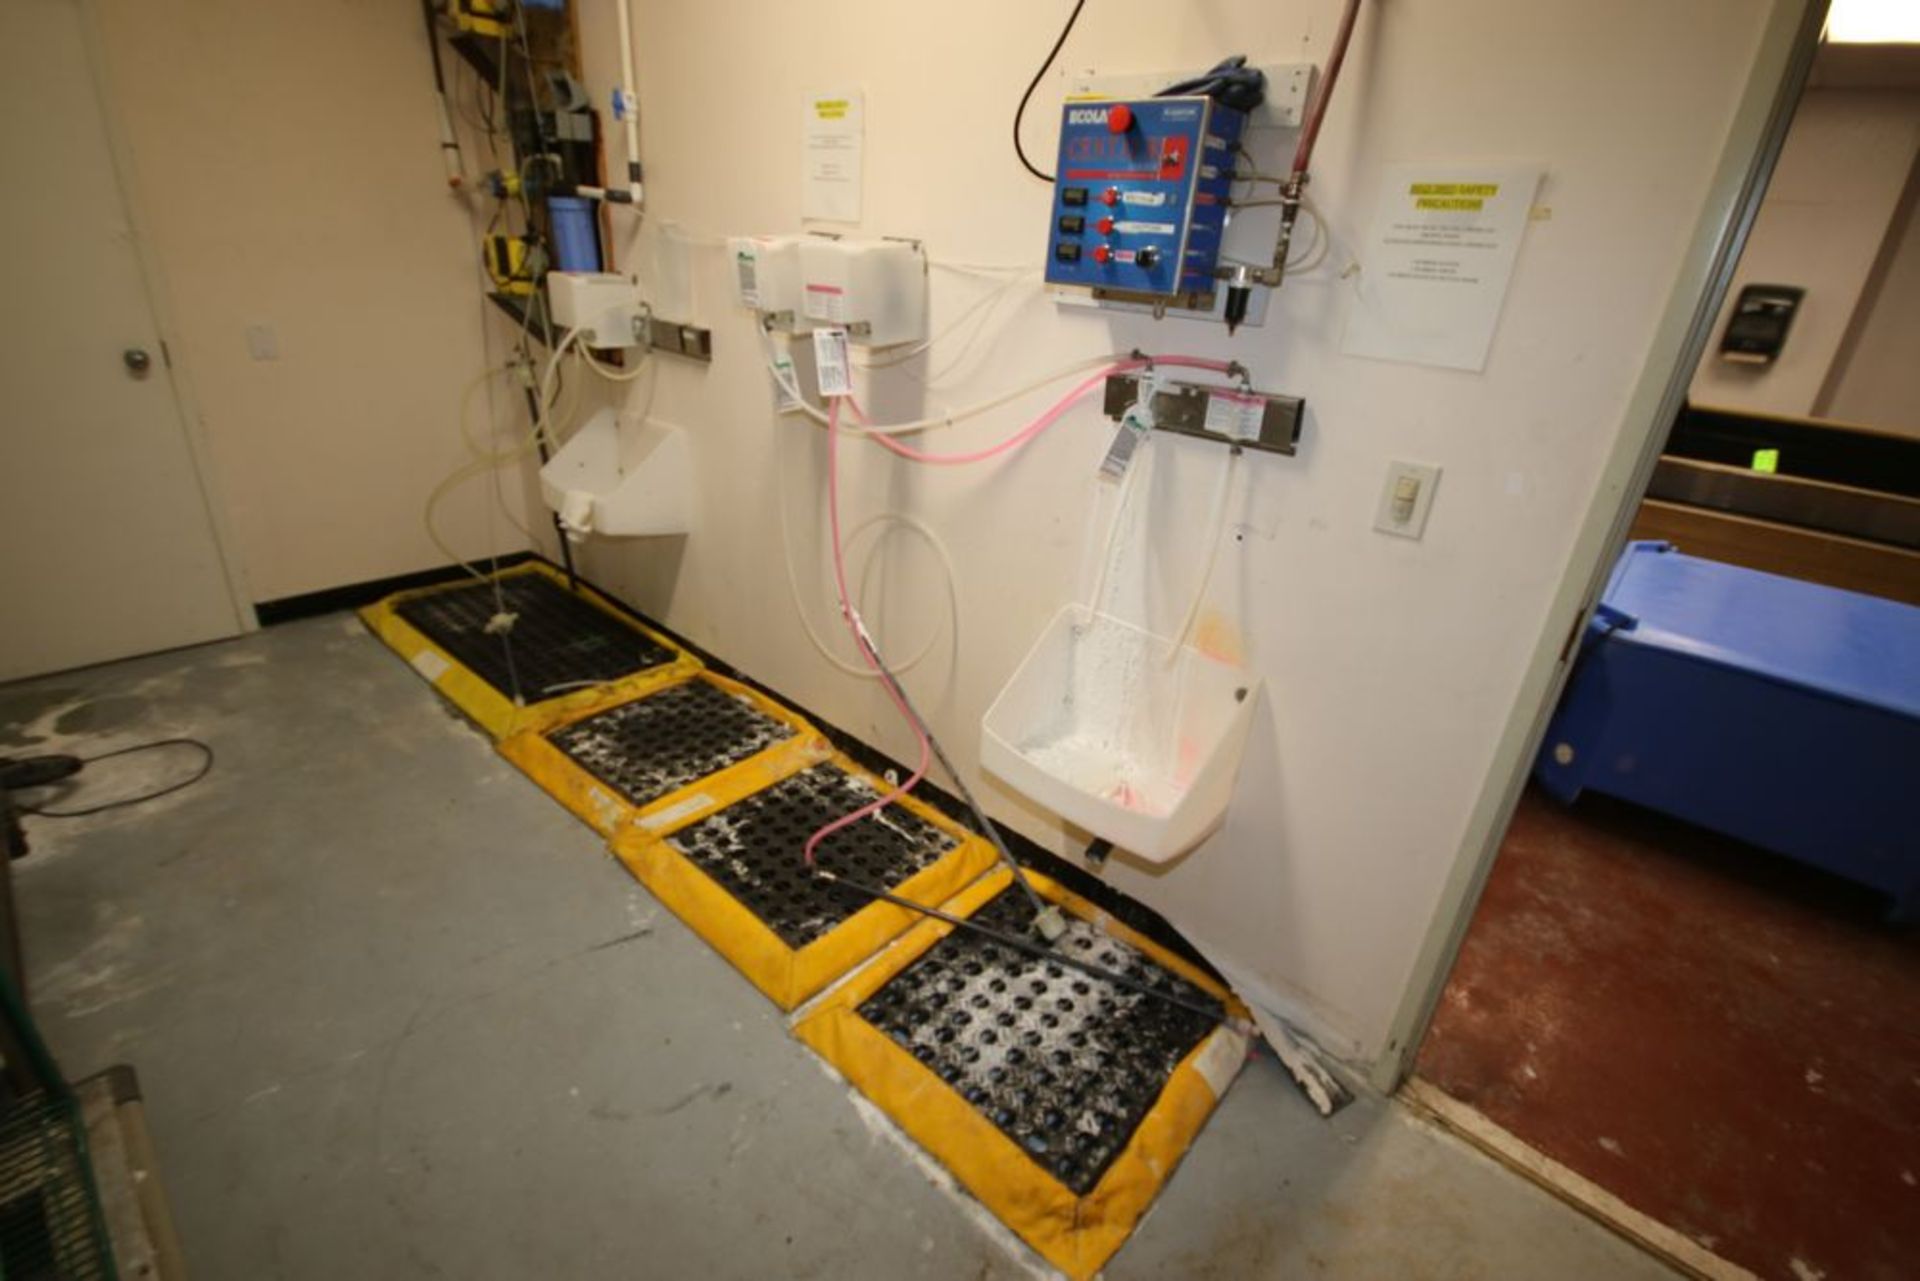 Contents of Room, Includes Chemical Containment Area with (4) Containment Matts, and Associated Wall - Image 2 of 4